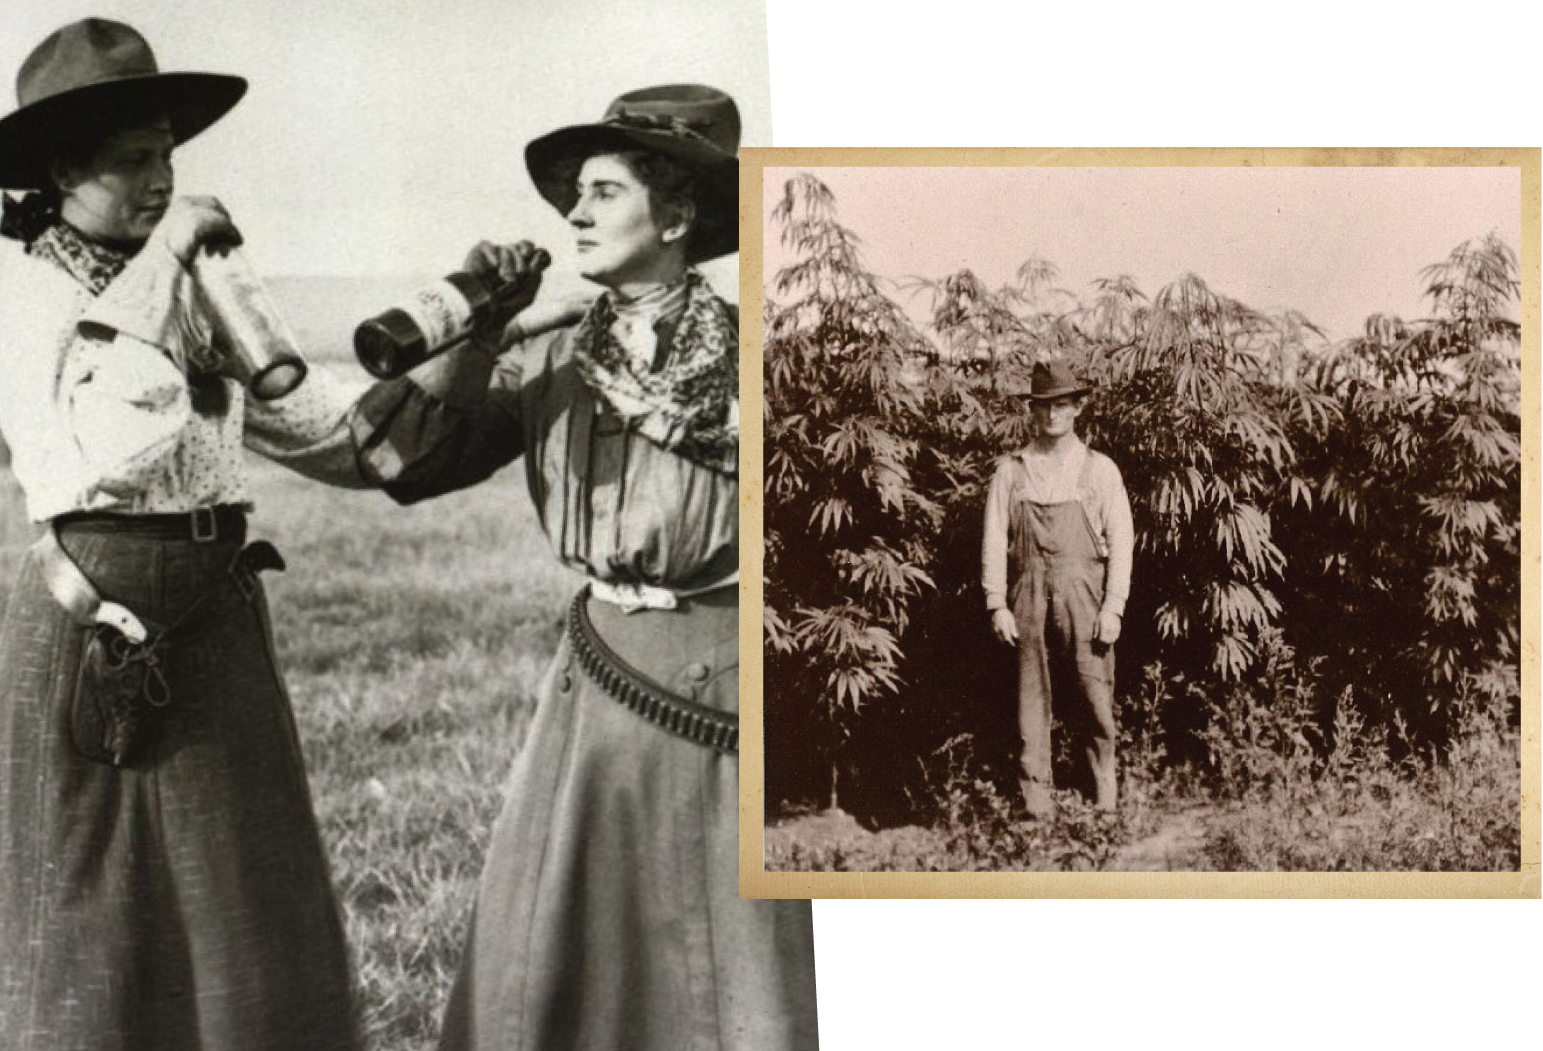 Black and white American west photographs of bootleggers and a hemp farmer